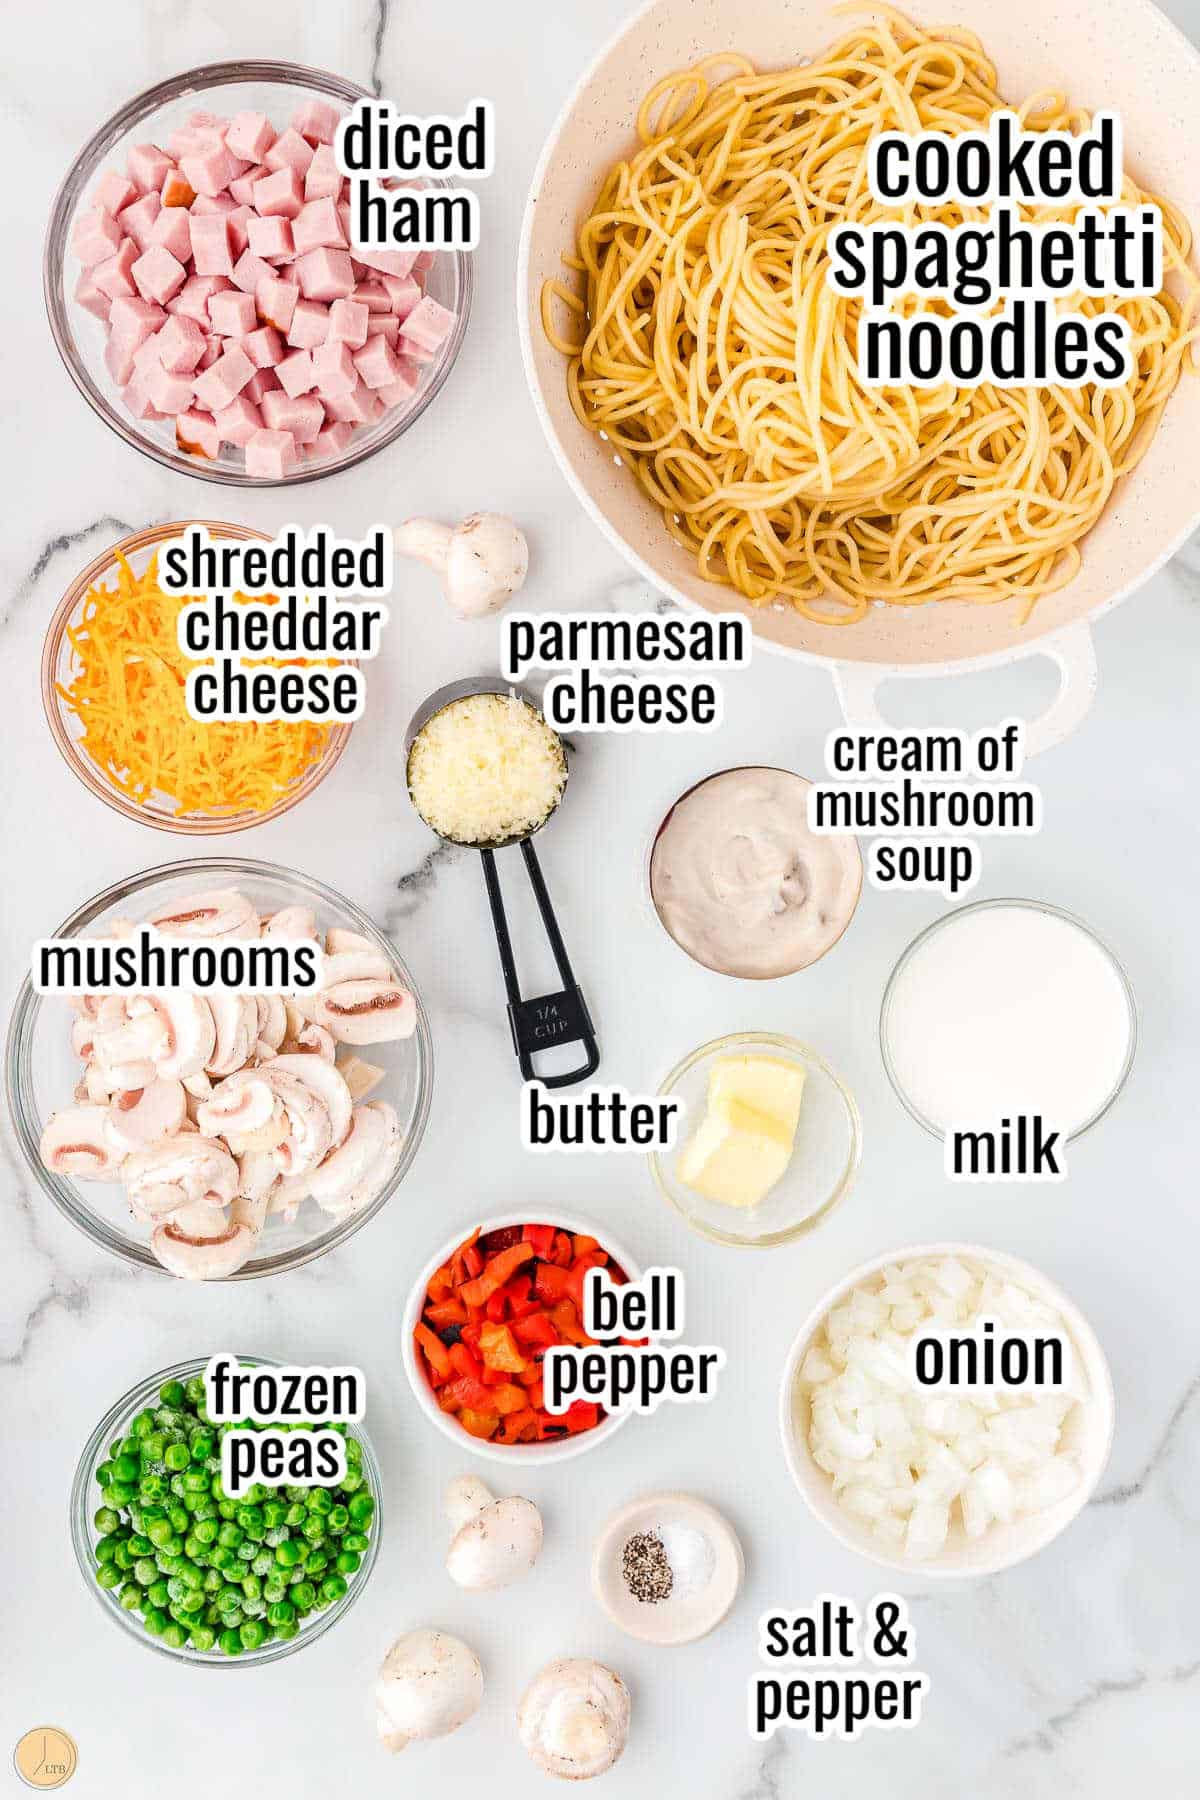 uncooked spaghetti and other ingredients in bowls